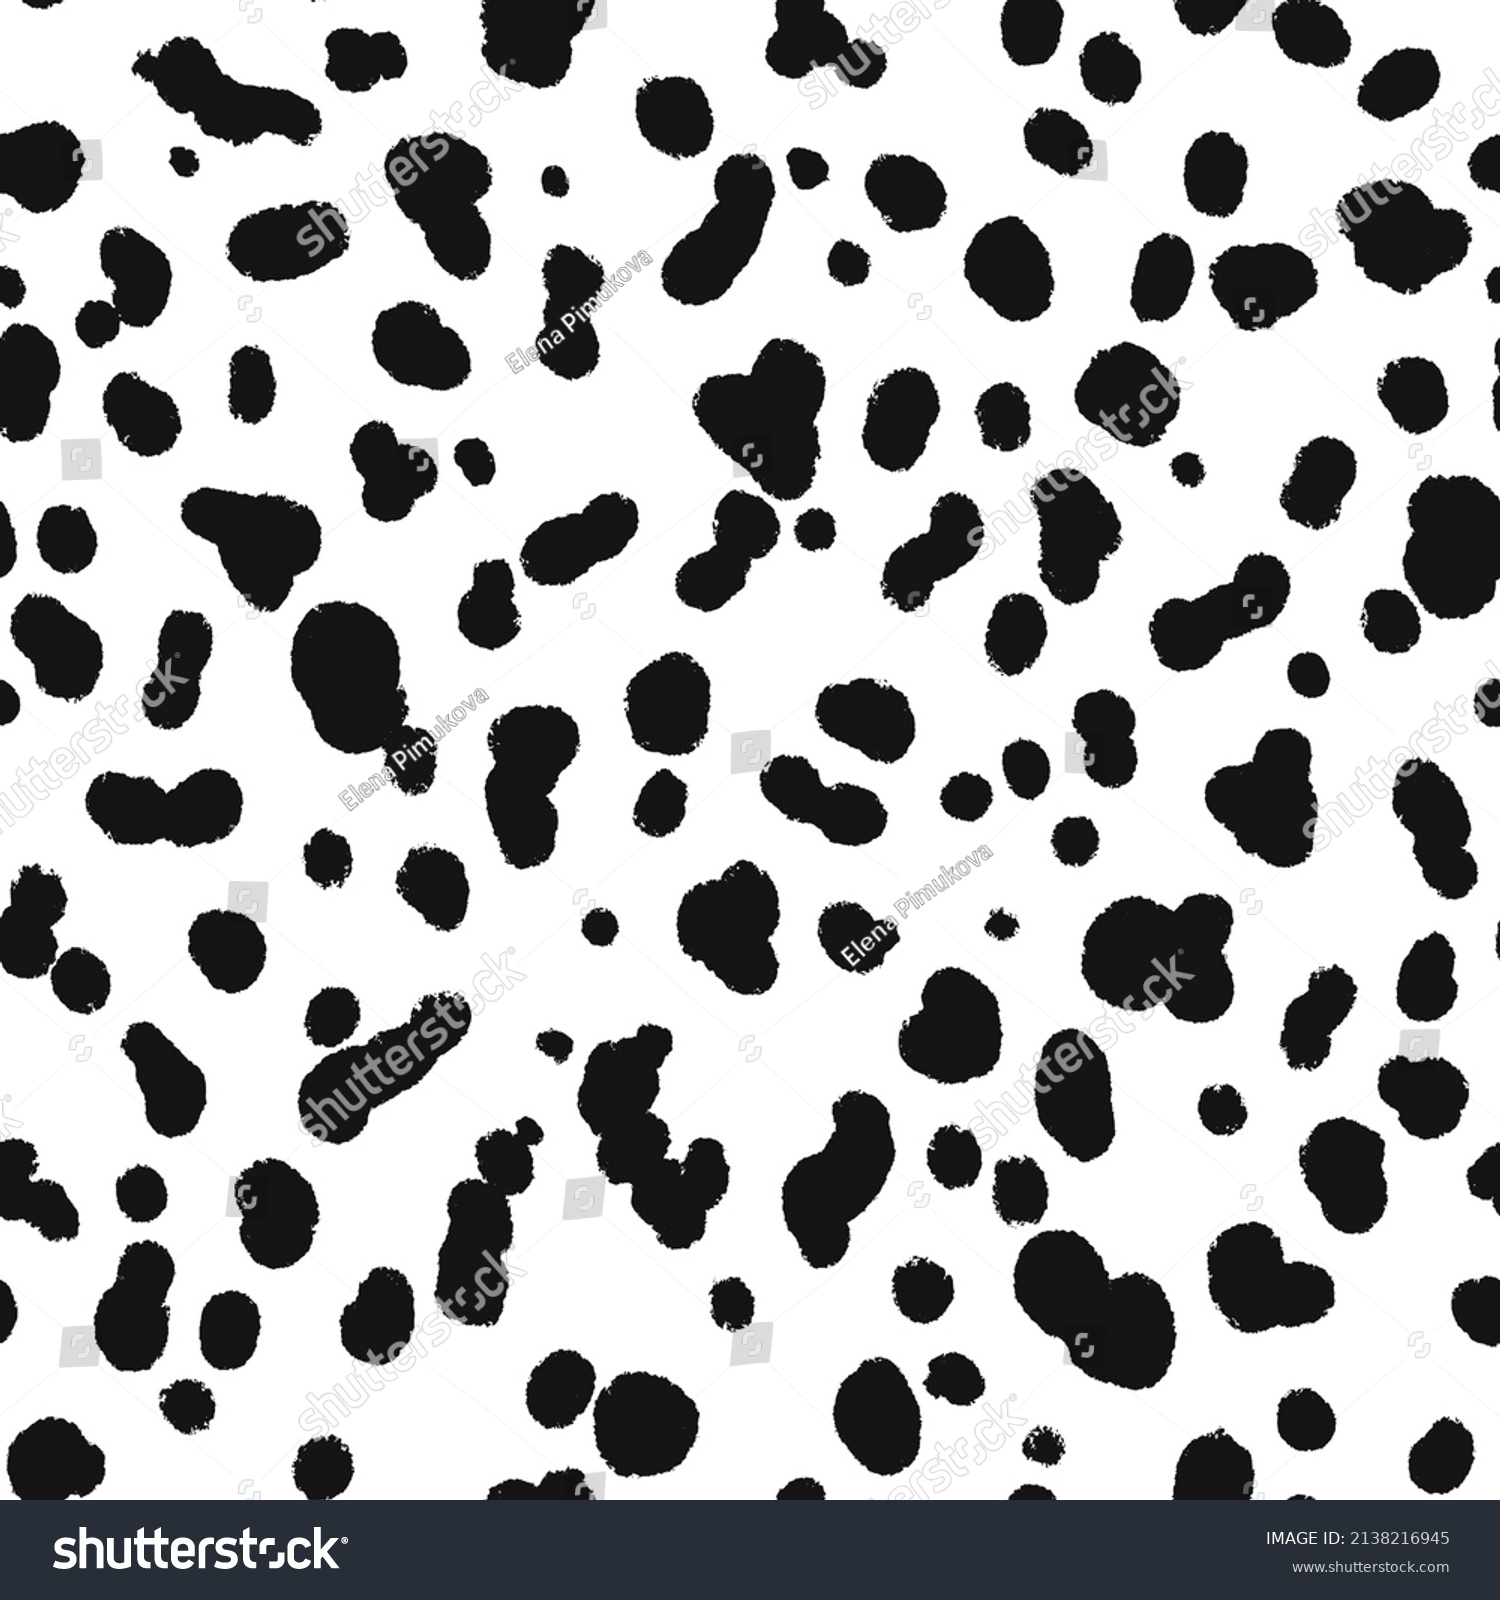 SVG of Dalmatian coloration seamless pattern. Black abstract organic blobs on white background. Black dalmatian spots on a white backdrop. Animal print. Vector hand drawn illustration. svg